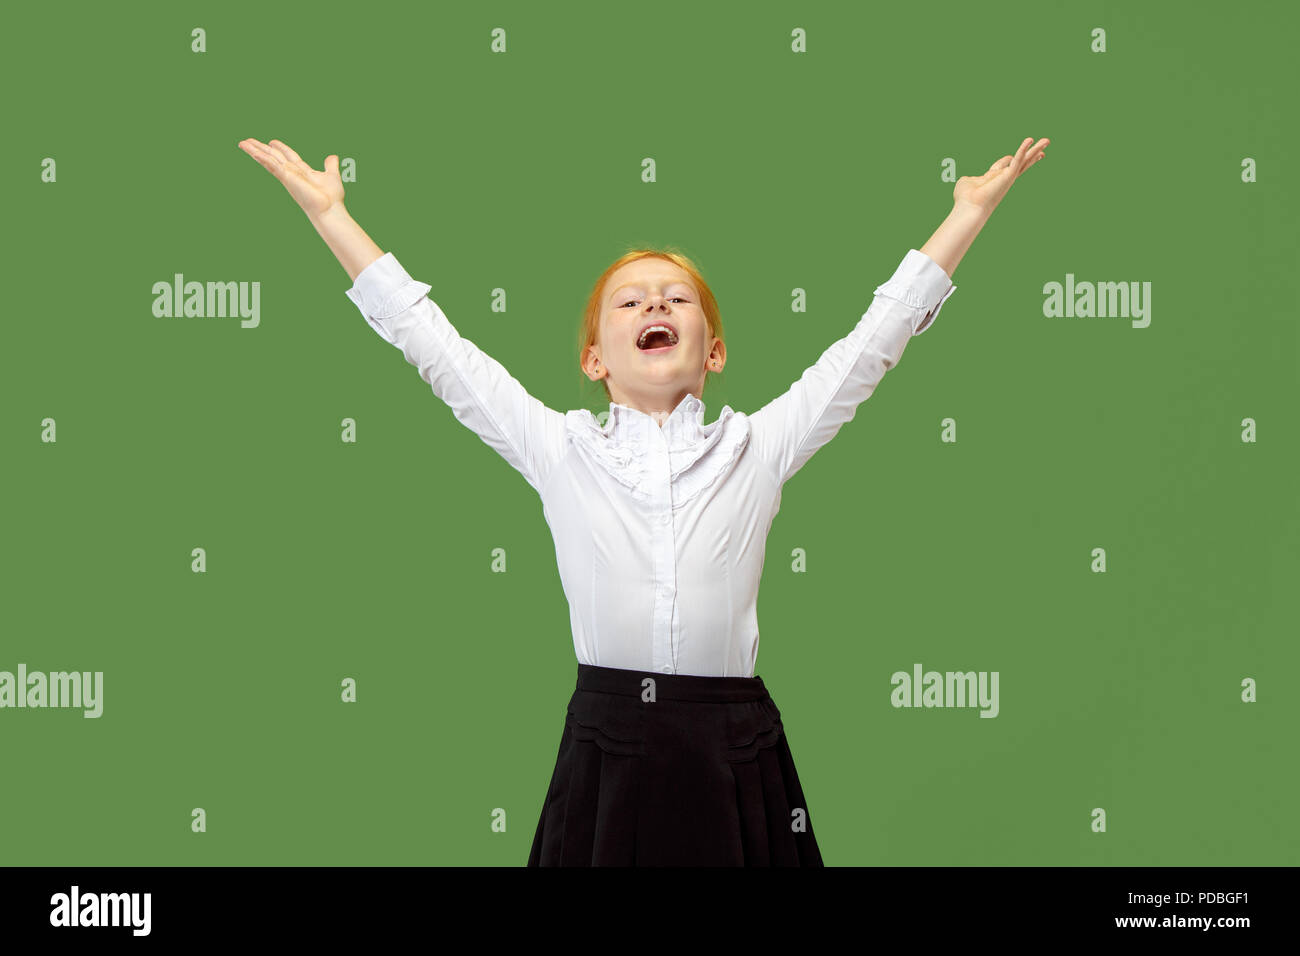 I won. Winning success happy teen girl celebrating being a winner. Dynamic image of caucasian female model on green studio background. Victory, delight concept. Human facial emotions concept. Trendy colors Stock Photo